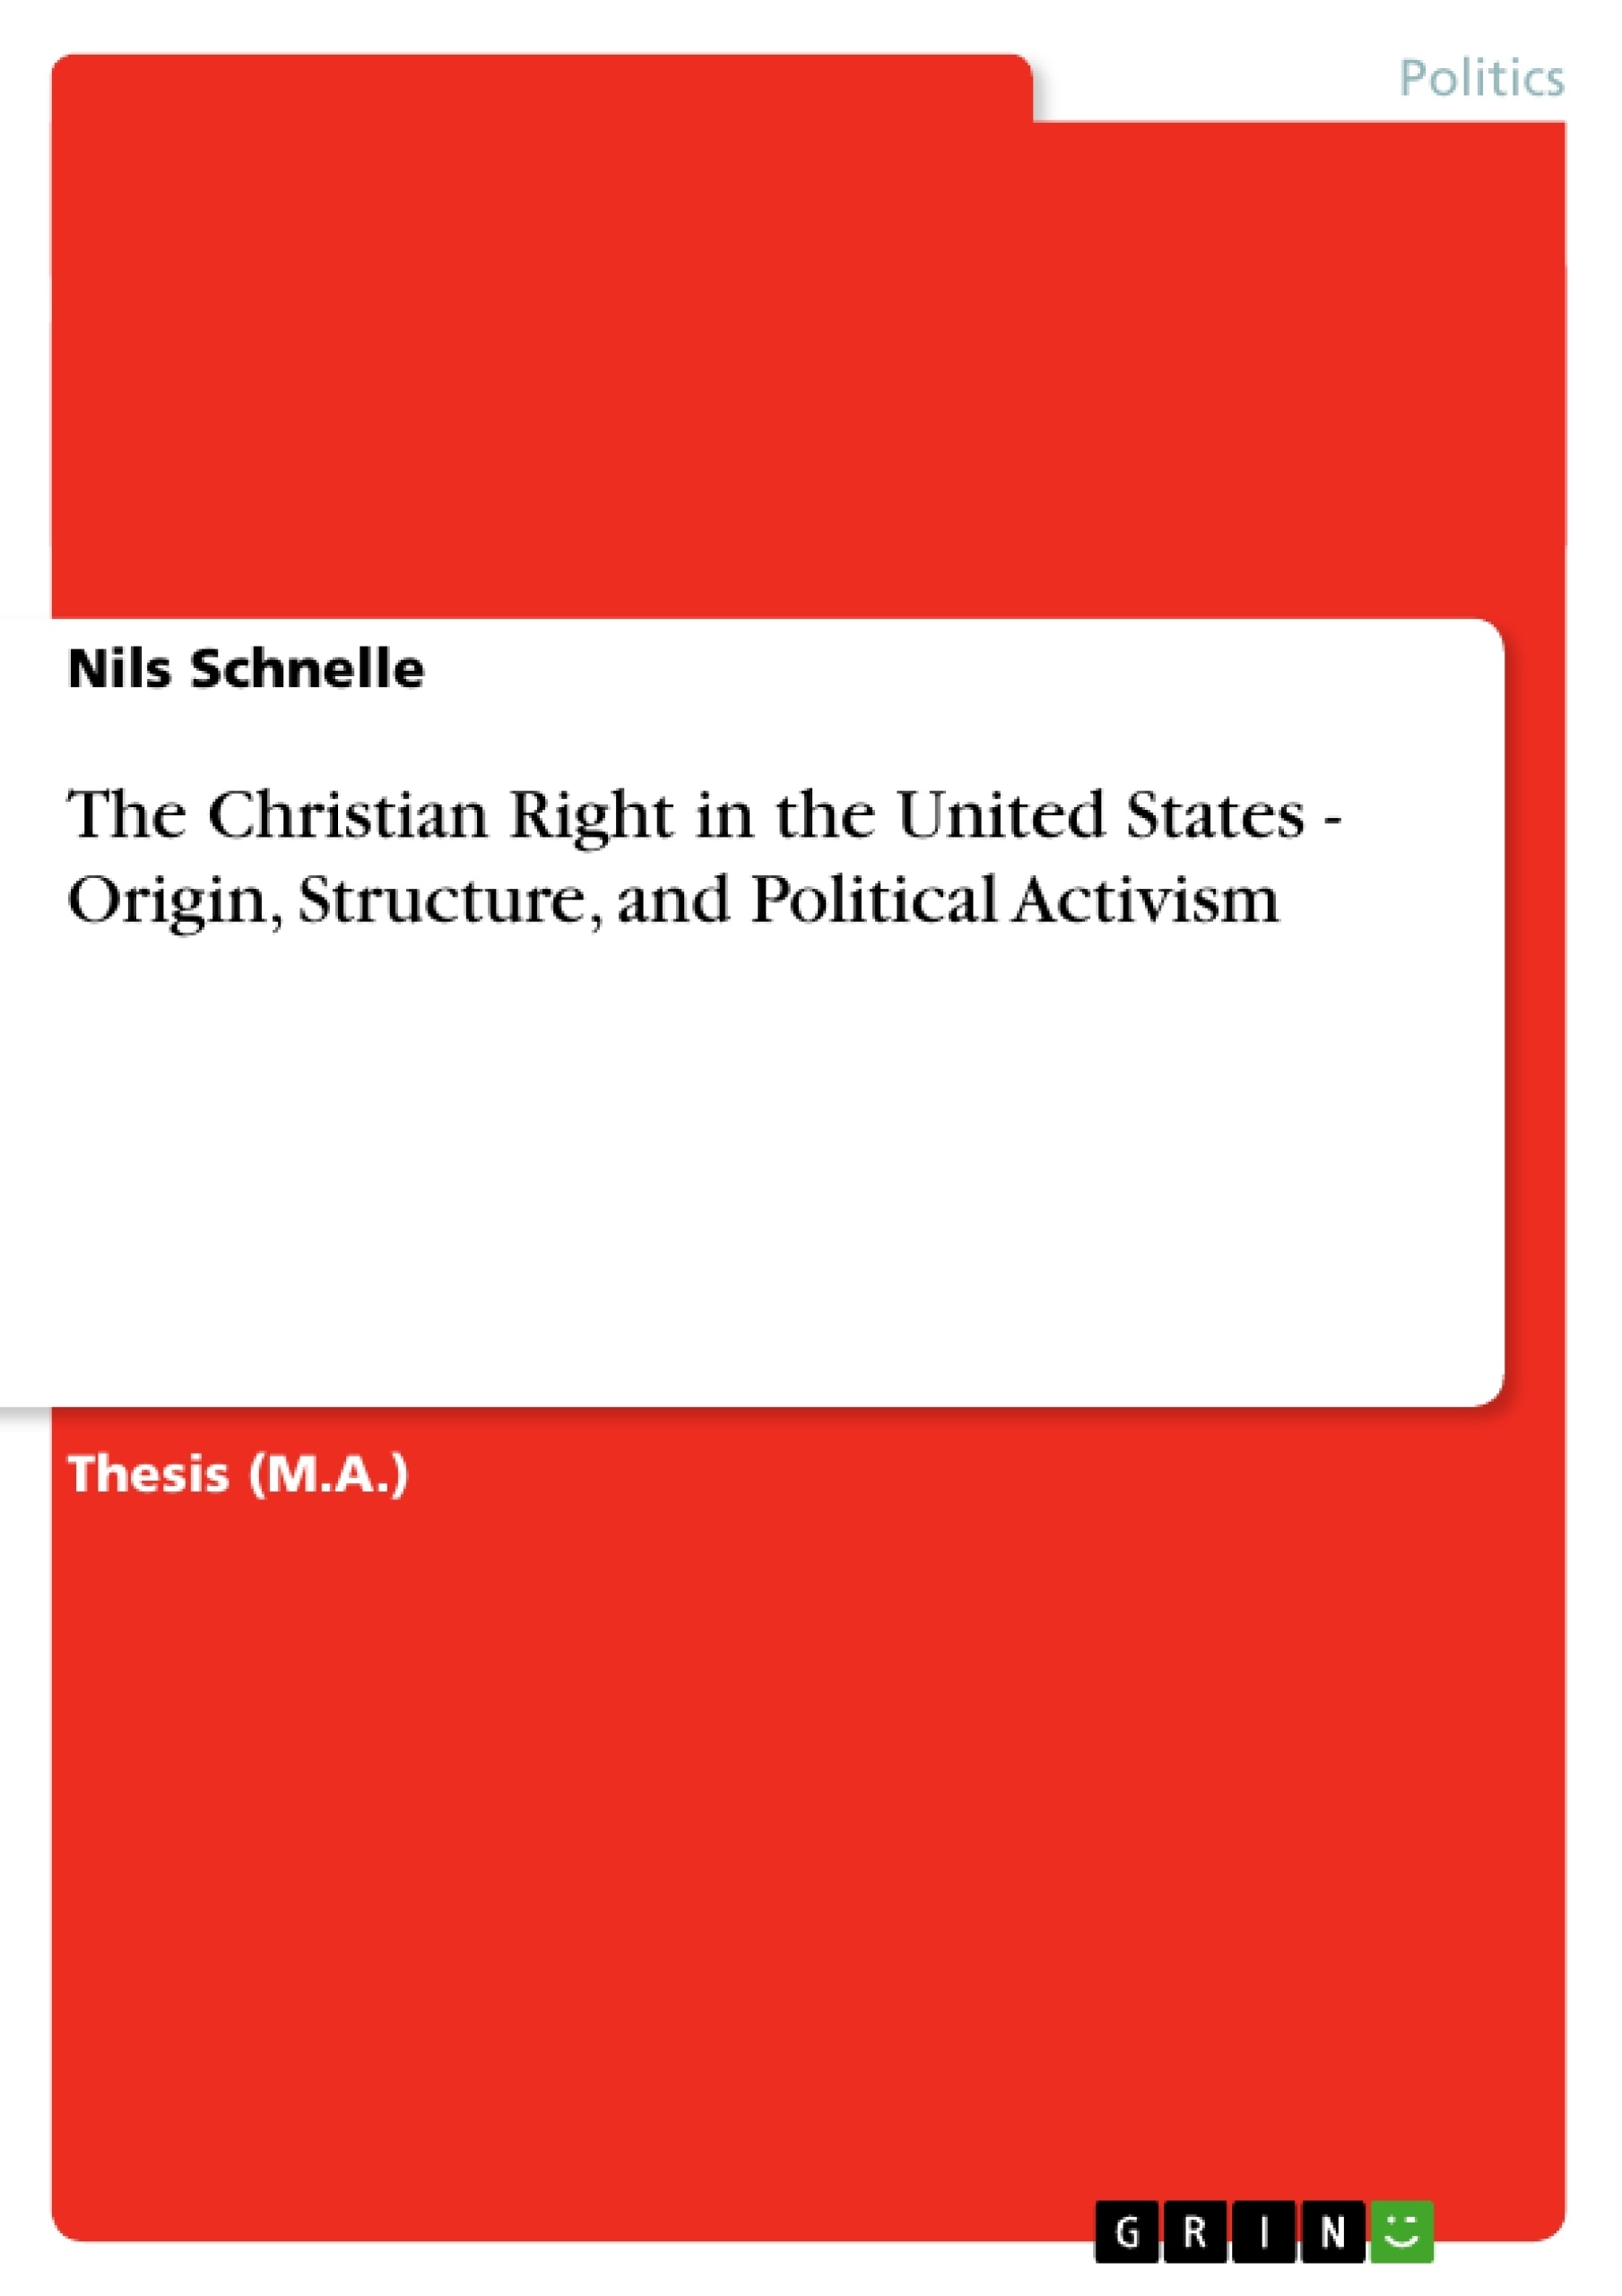 Título: The Christian Right in the United States - Origin, Structure, and Political Activism